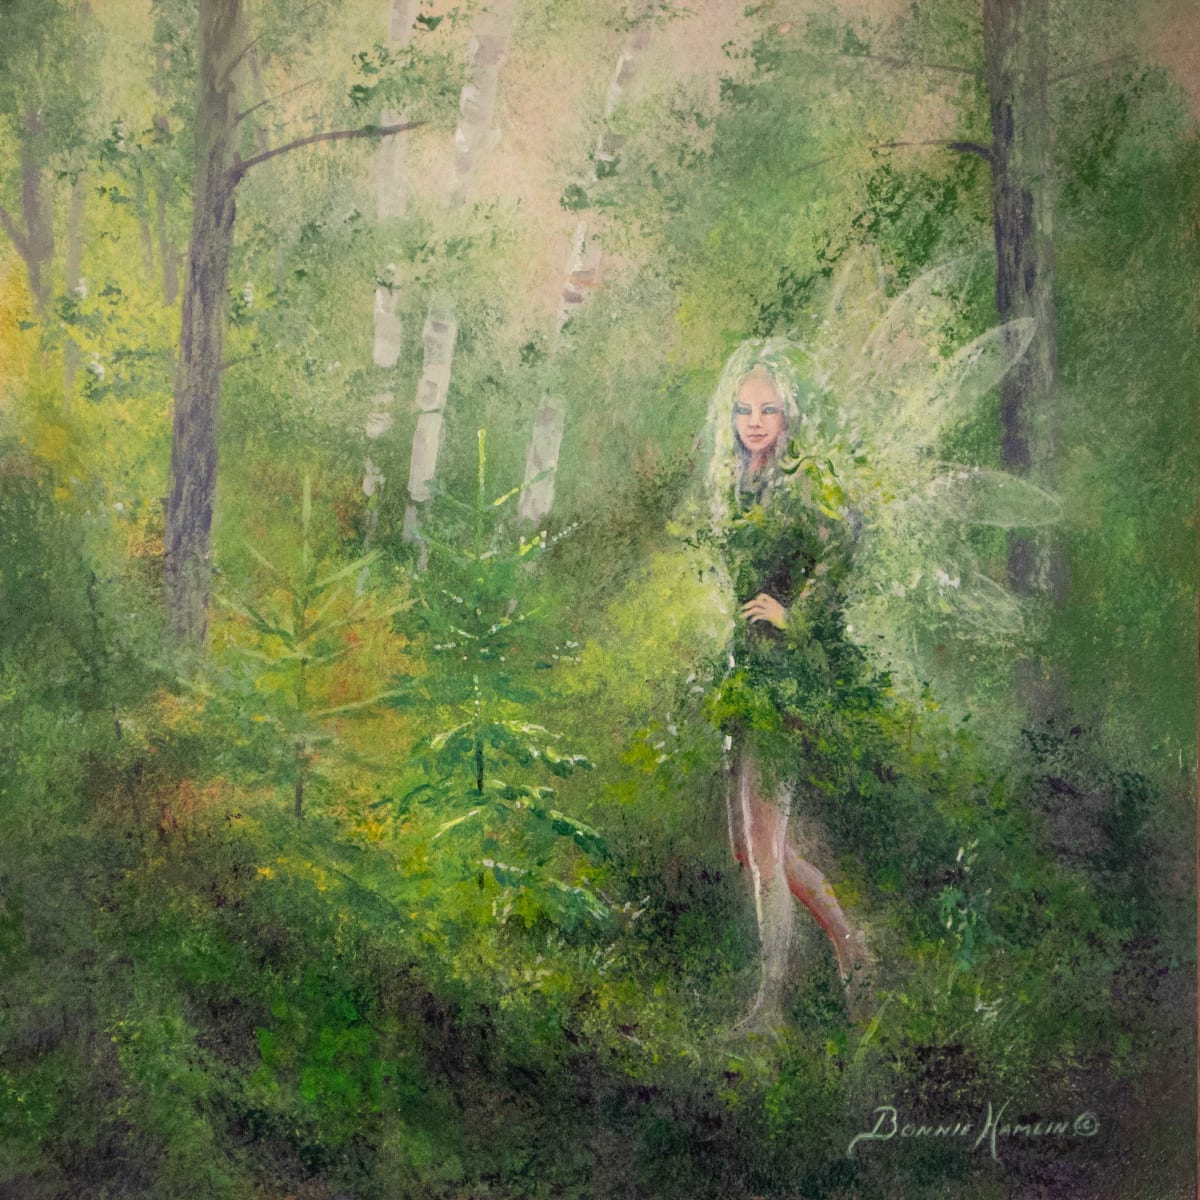 Forest Fairy Inner Spirit by Bonnie Hamlin  Image: Wondering the forest paths finding peace, connecting with nature